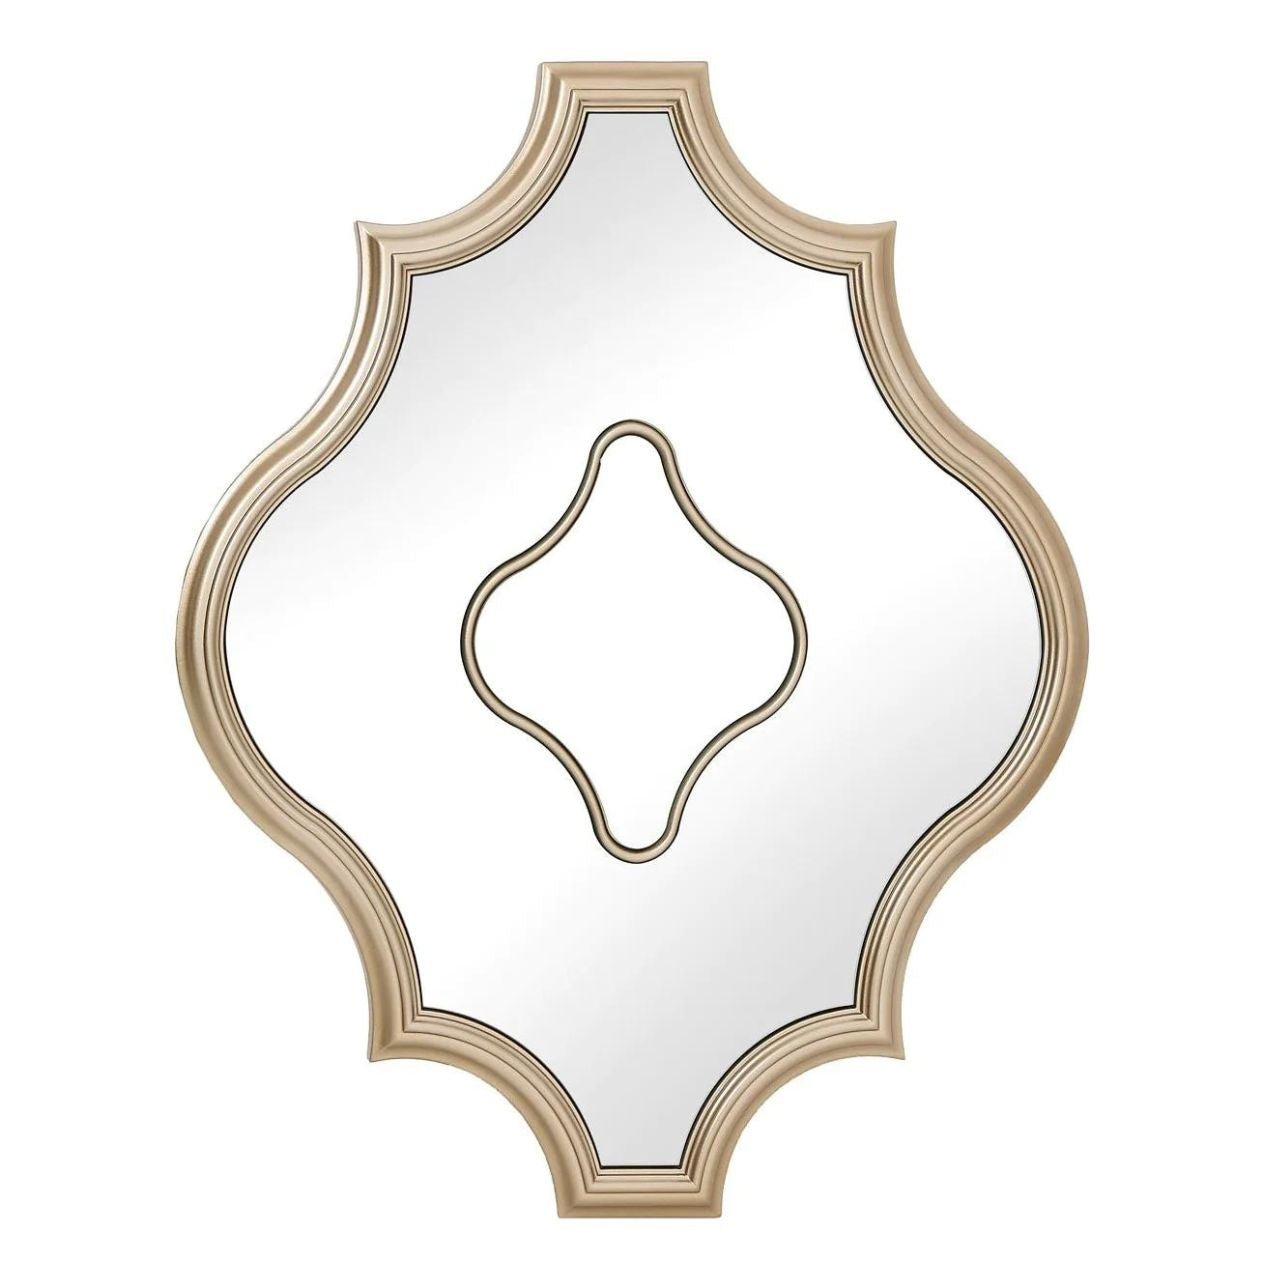 Mindy Brownes Racheal Mirror  Ogee shaped wall art mirror. This style of mirror is ideal hung in two's or threes, makes for a fabulous statement piece. Gold in colour.